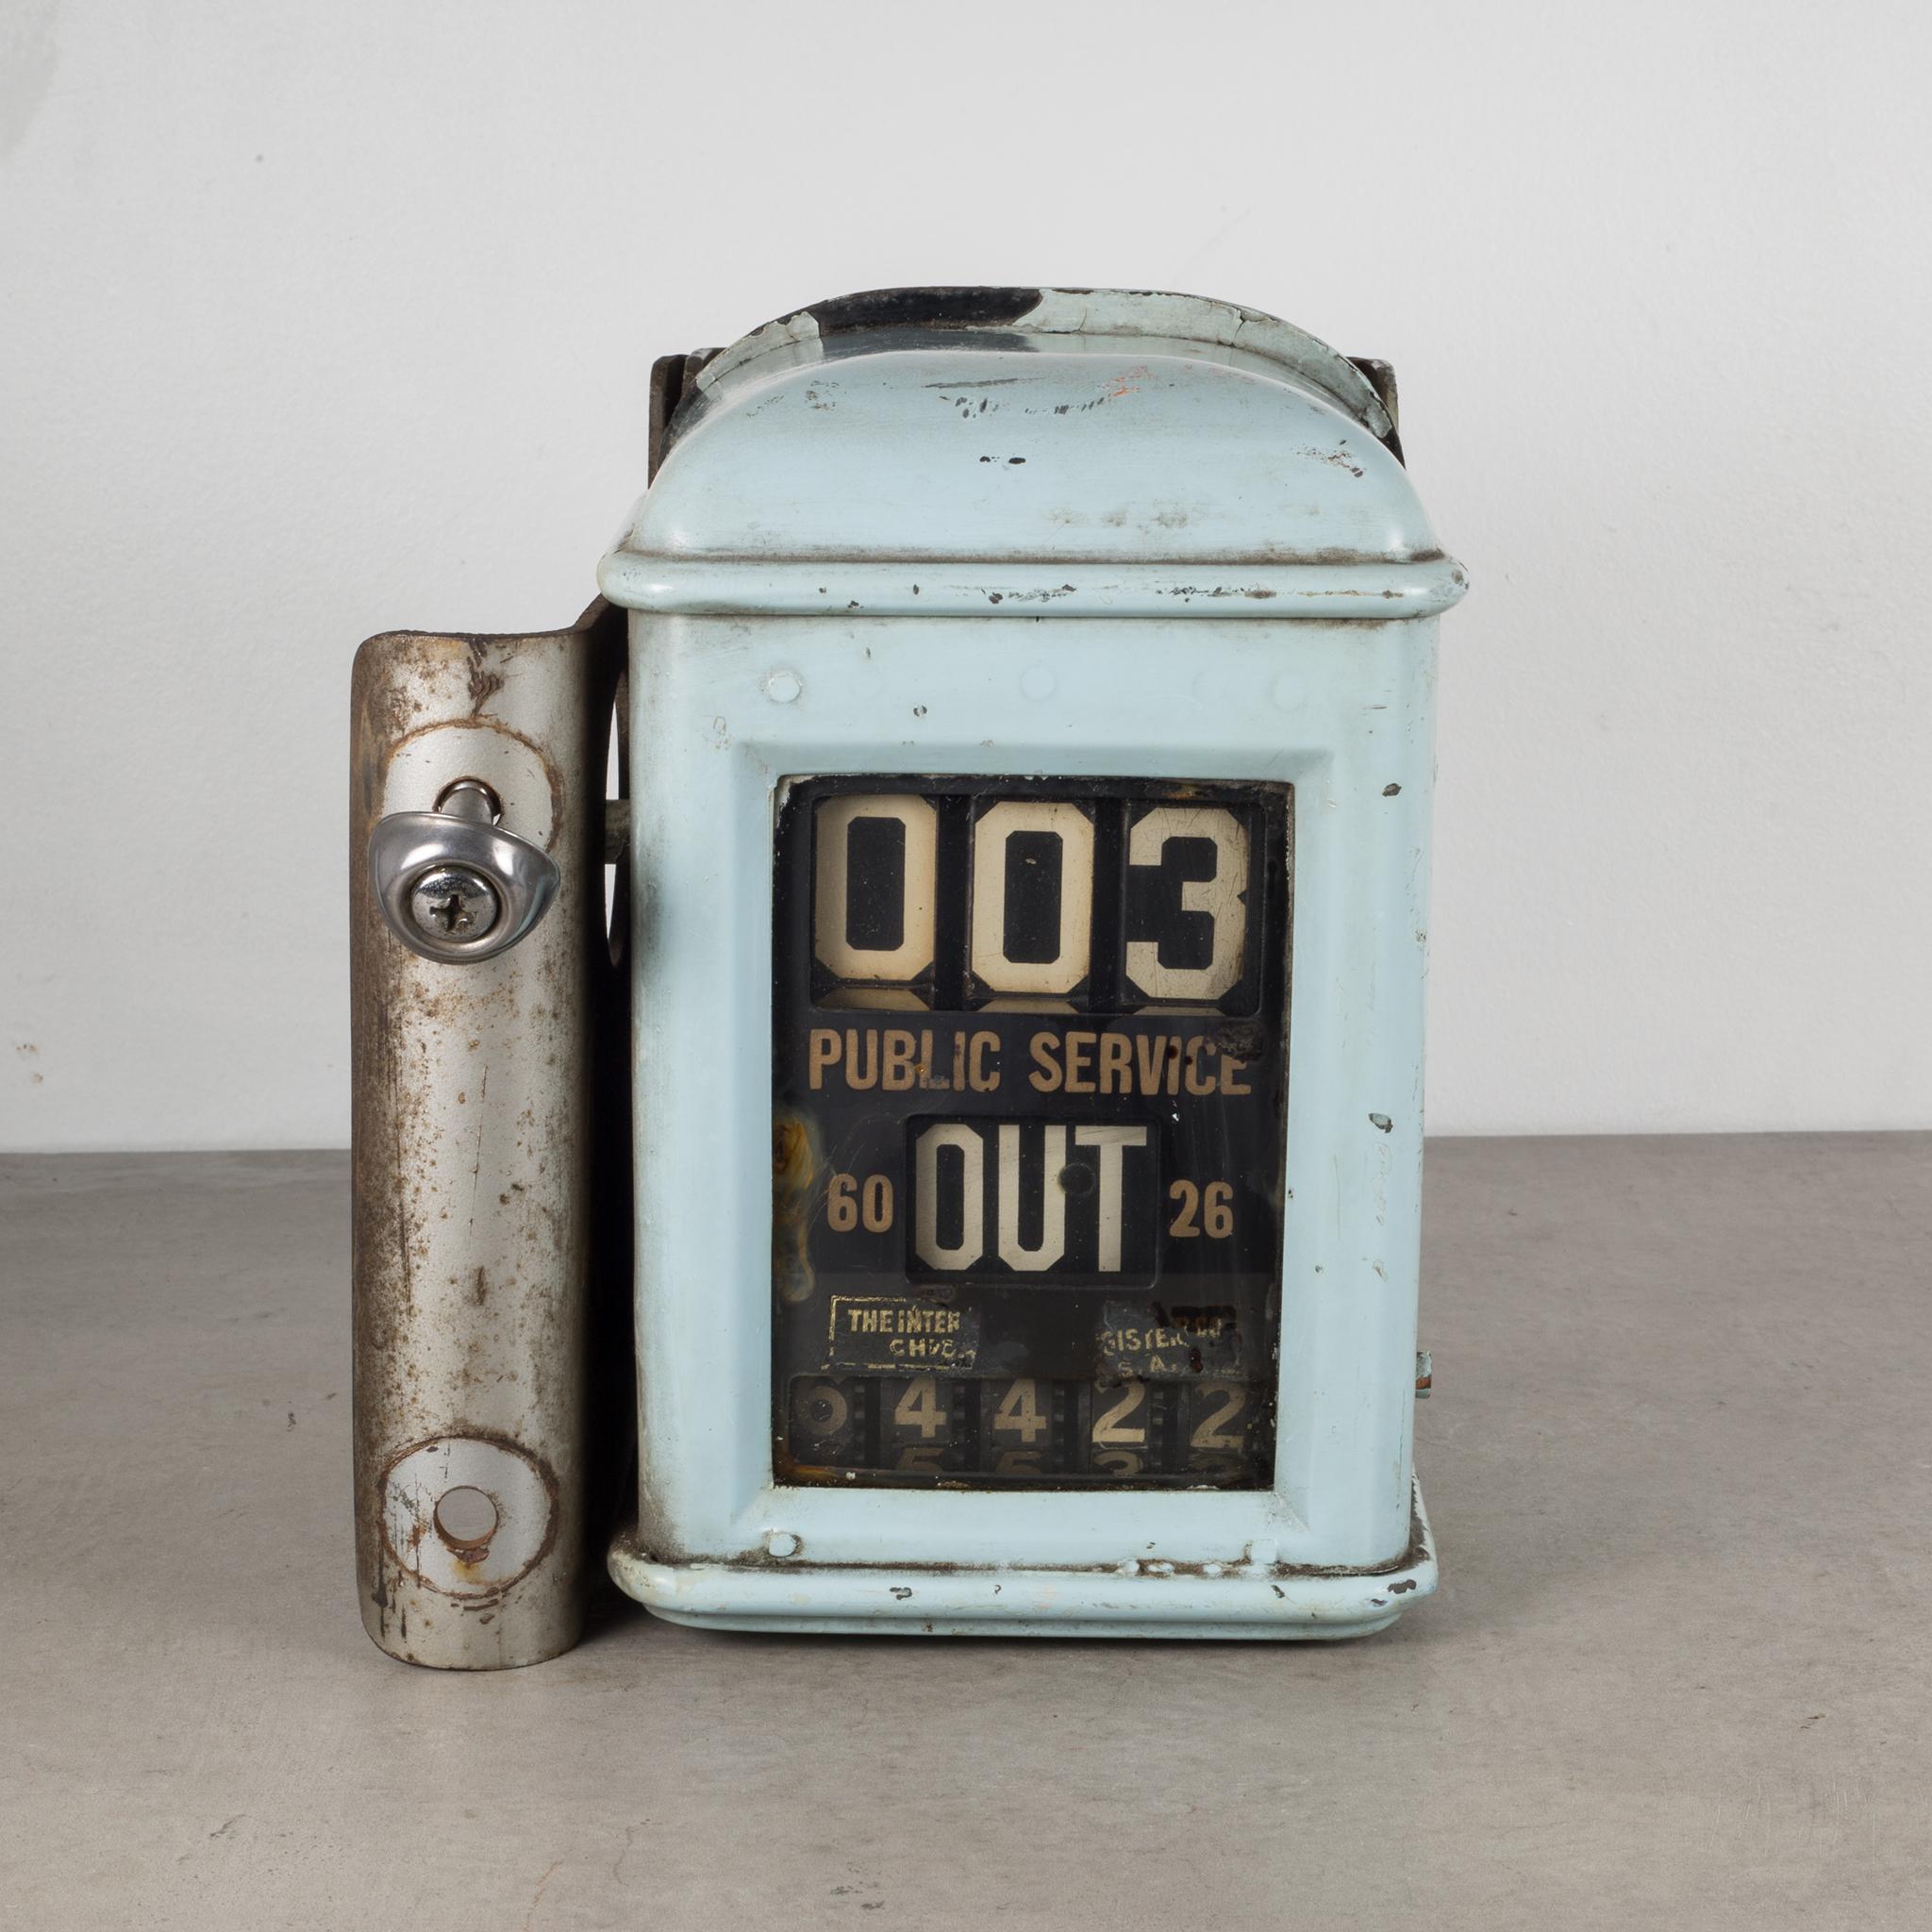 About

Antique original fare register box #6026 manufactured by the International Register Co. of Chicago. These were mounted in streetcars and rapid transit booths to record the number of fares. This fare box has intact glass panel and working